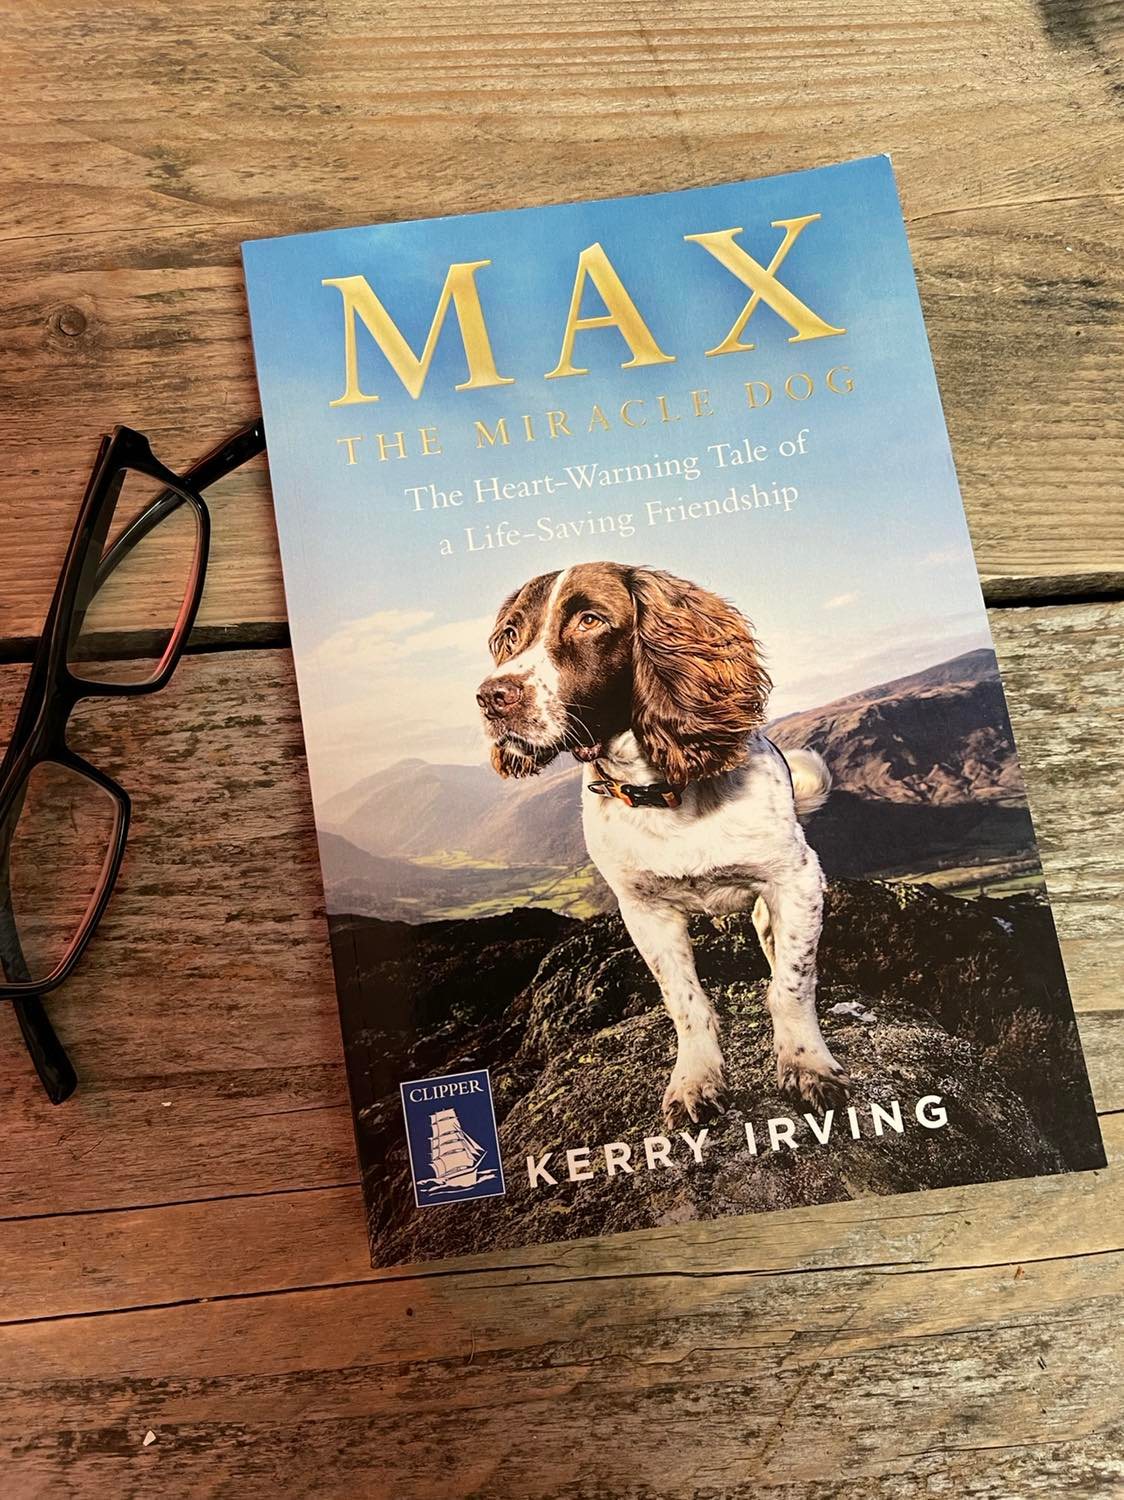 Max the Miracle Dog Paperback edition